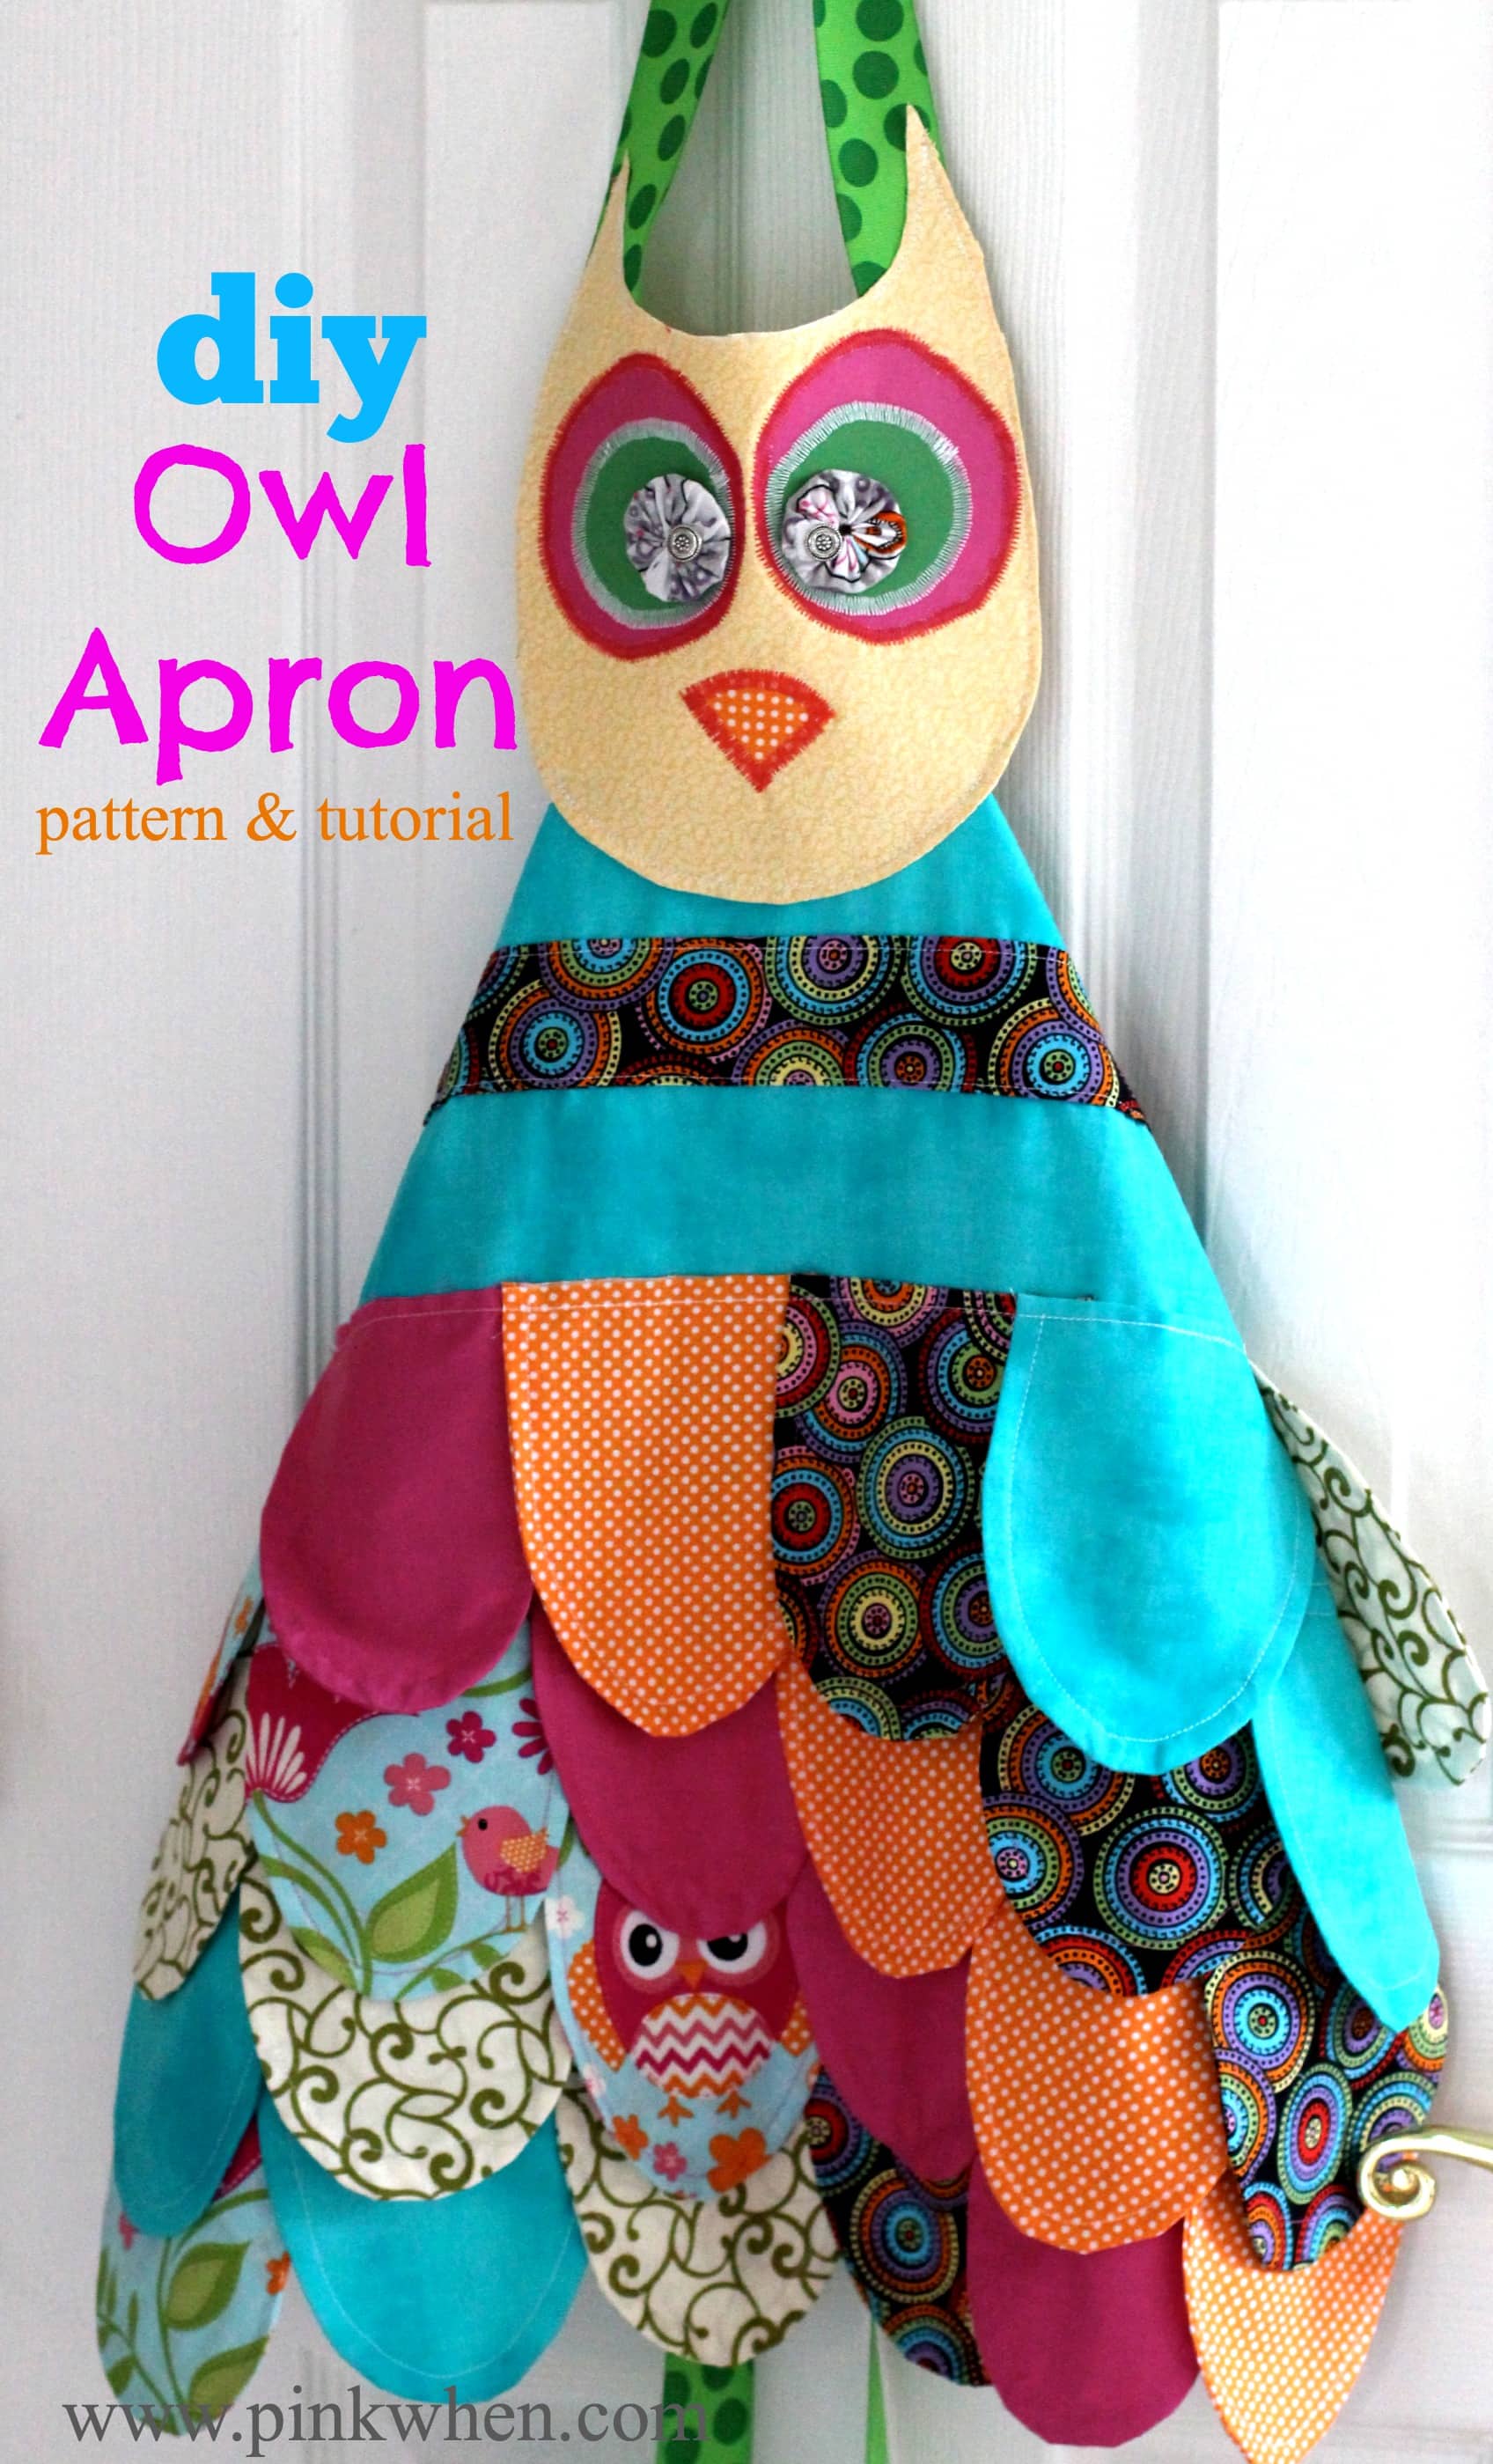 My Little Owl Apron & Pattern from PinkWhen.com